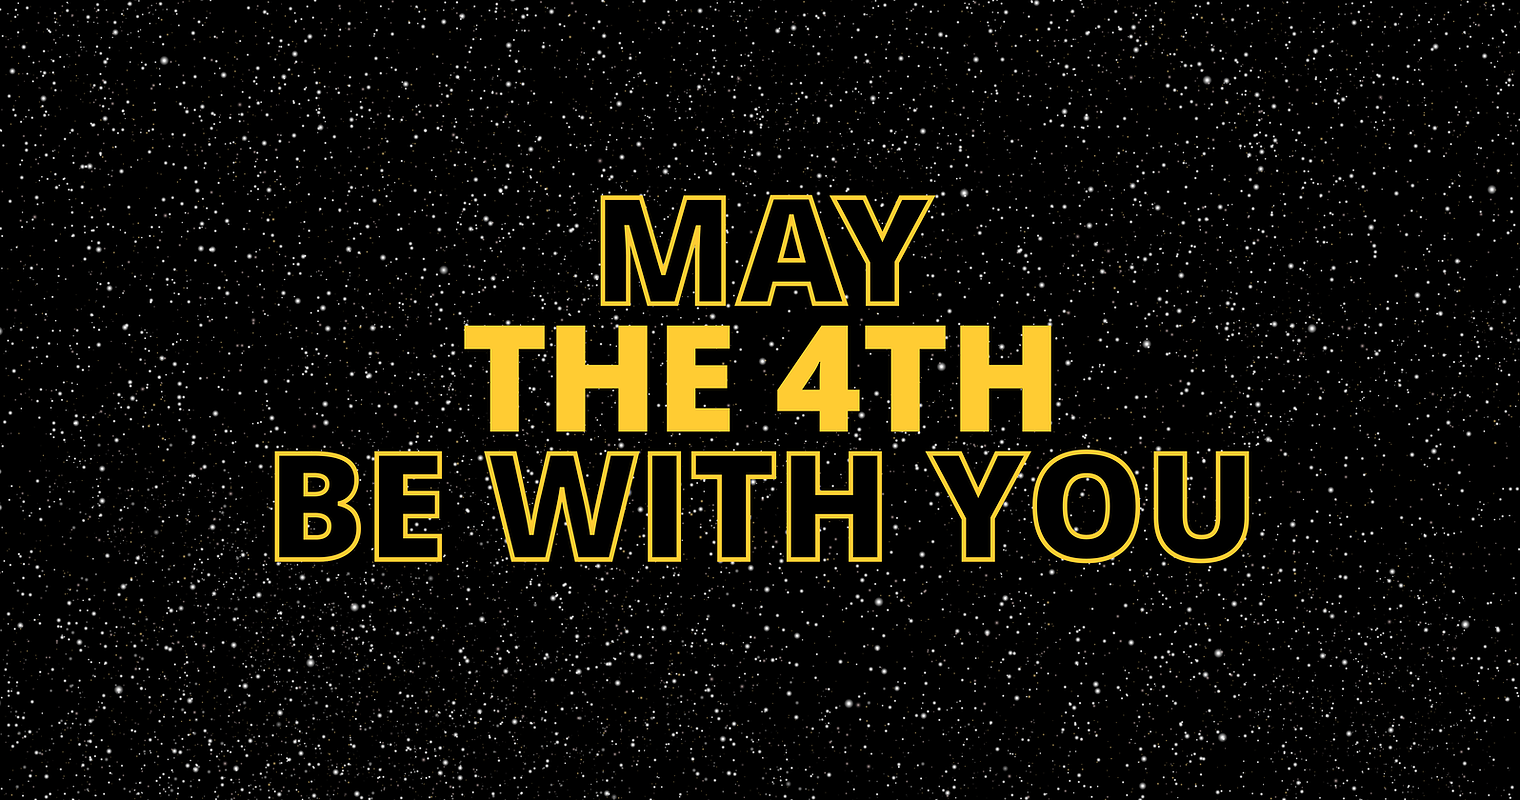 Google Celebrates Star Wars Day With Search Console Easter Eggs